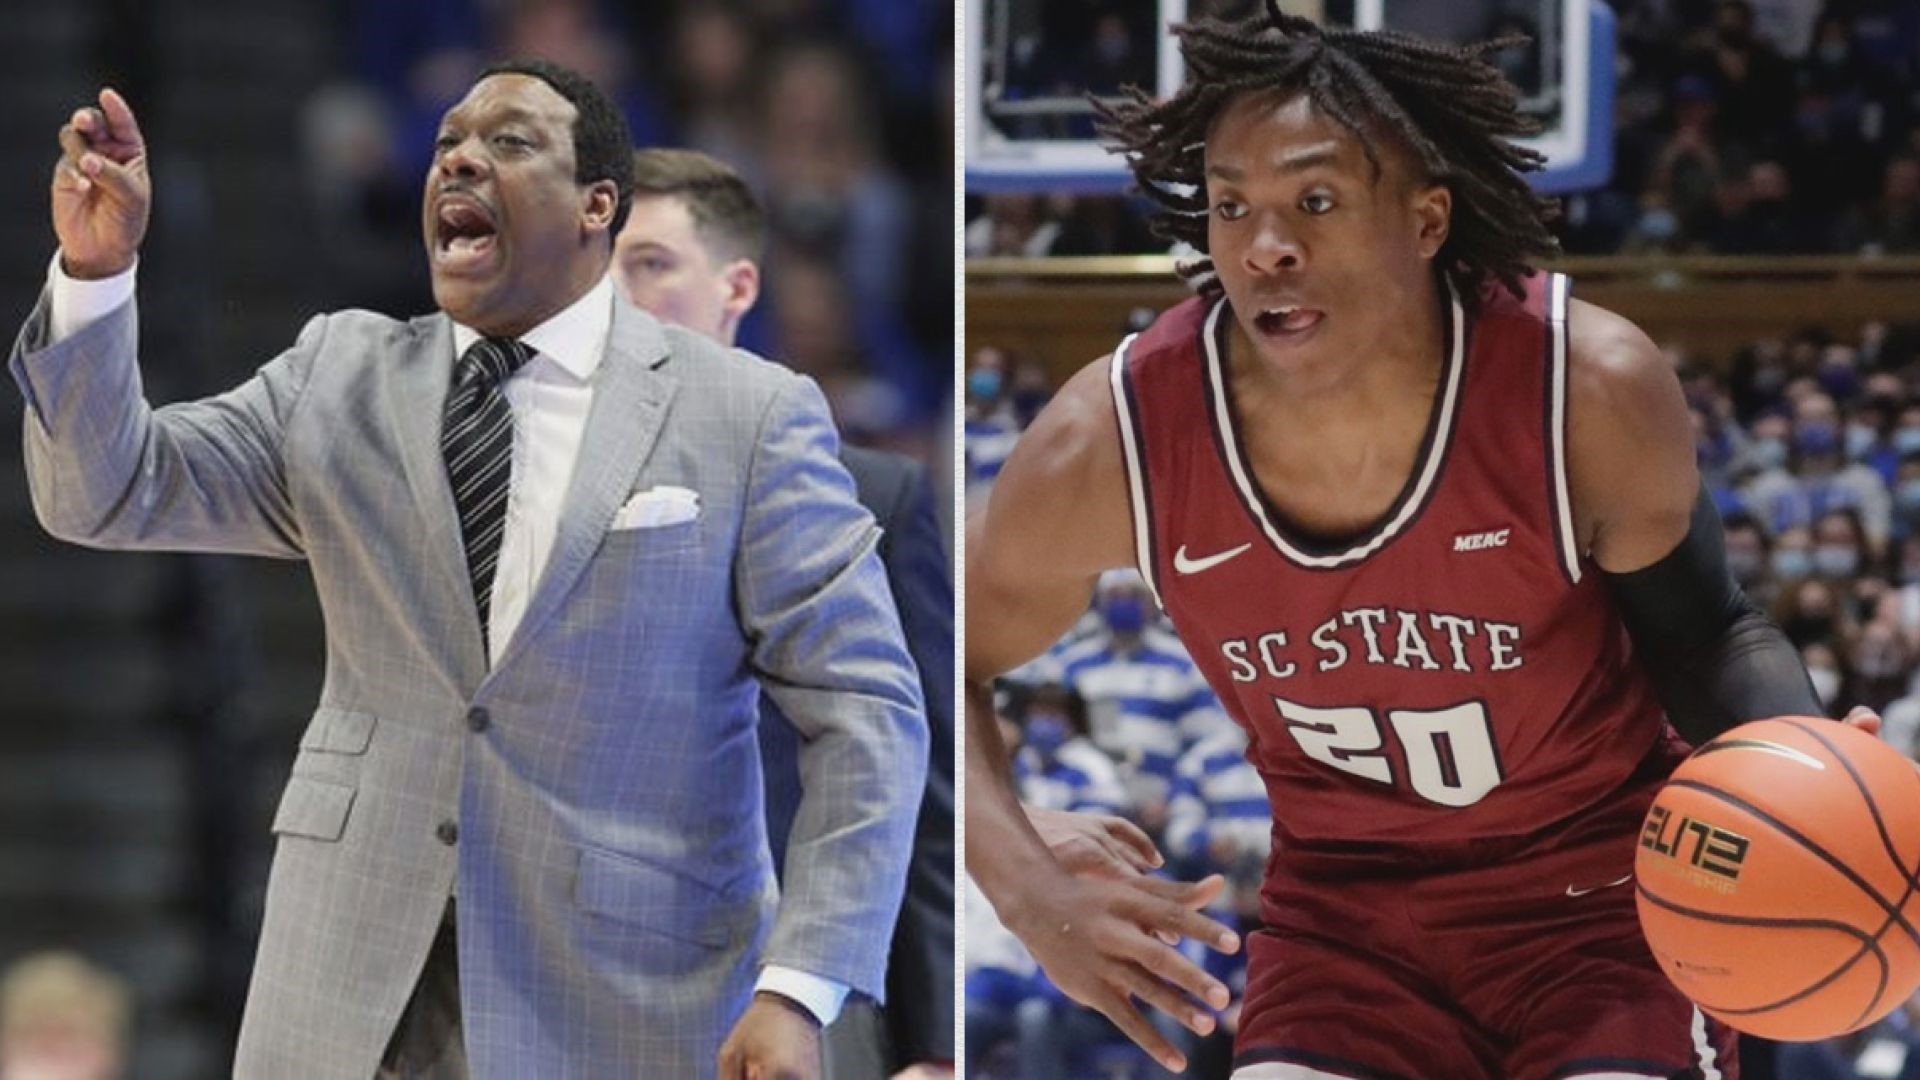 South Carolina State Men's Basketball Coach Tony Madlock and his son TJ have spearheaded a turnaround for the Bulldog program.